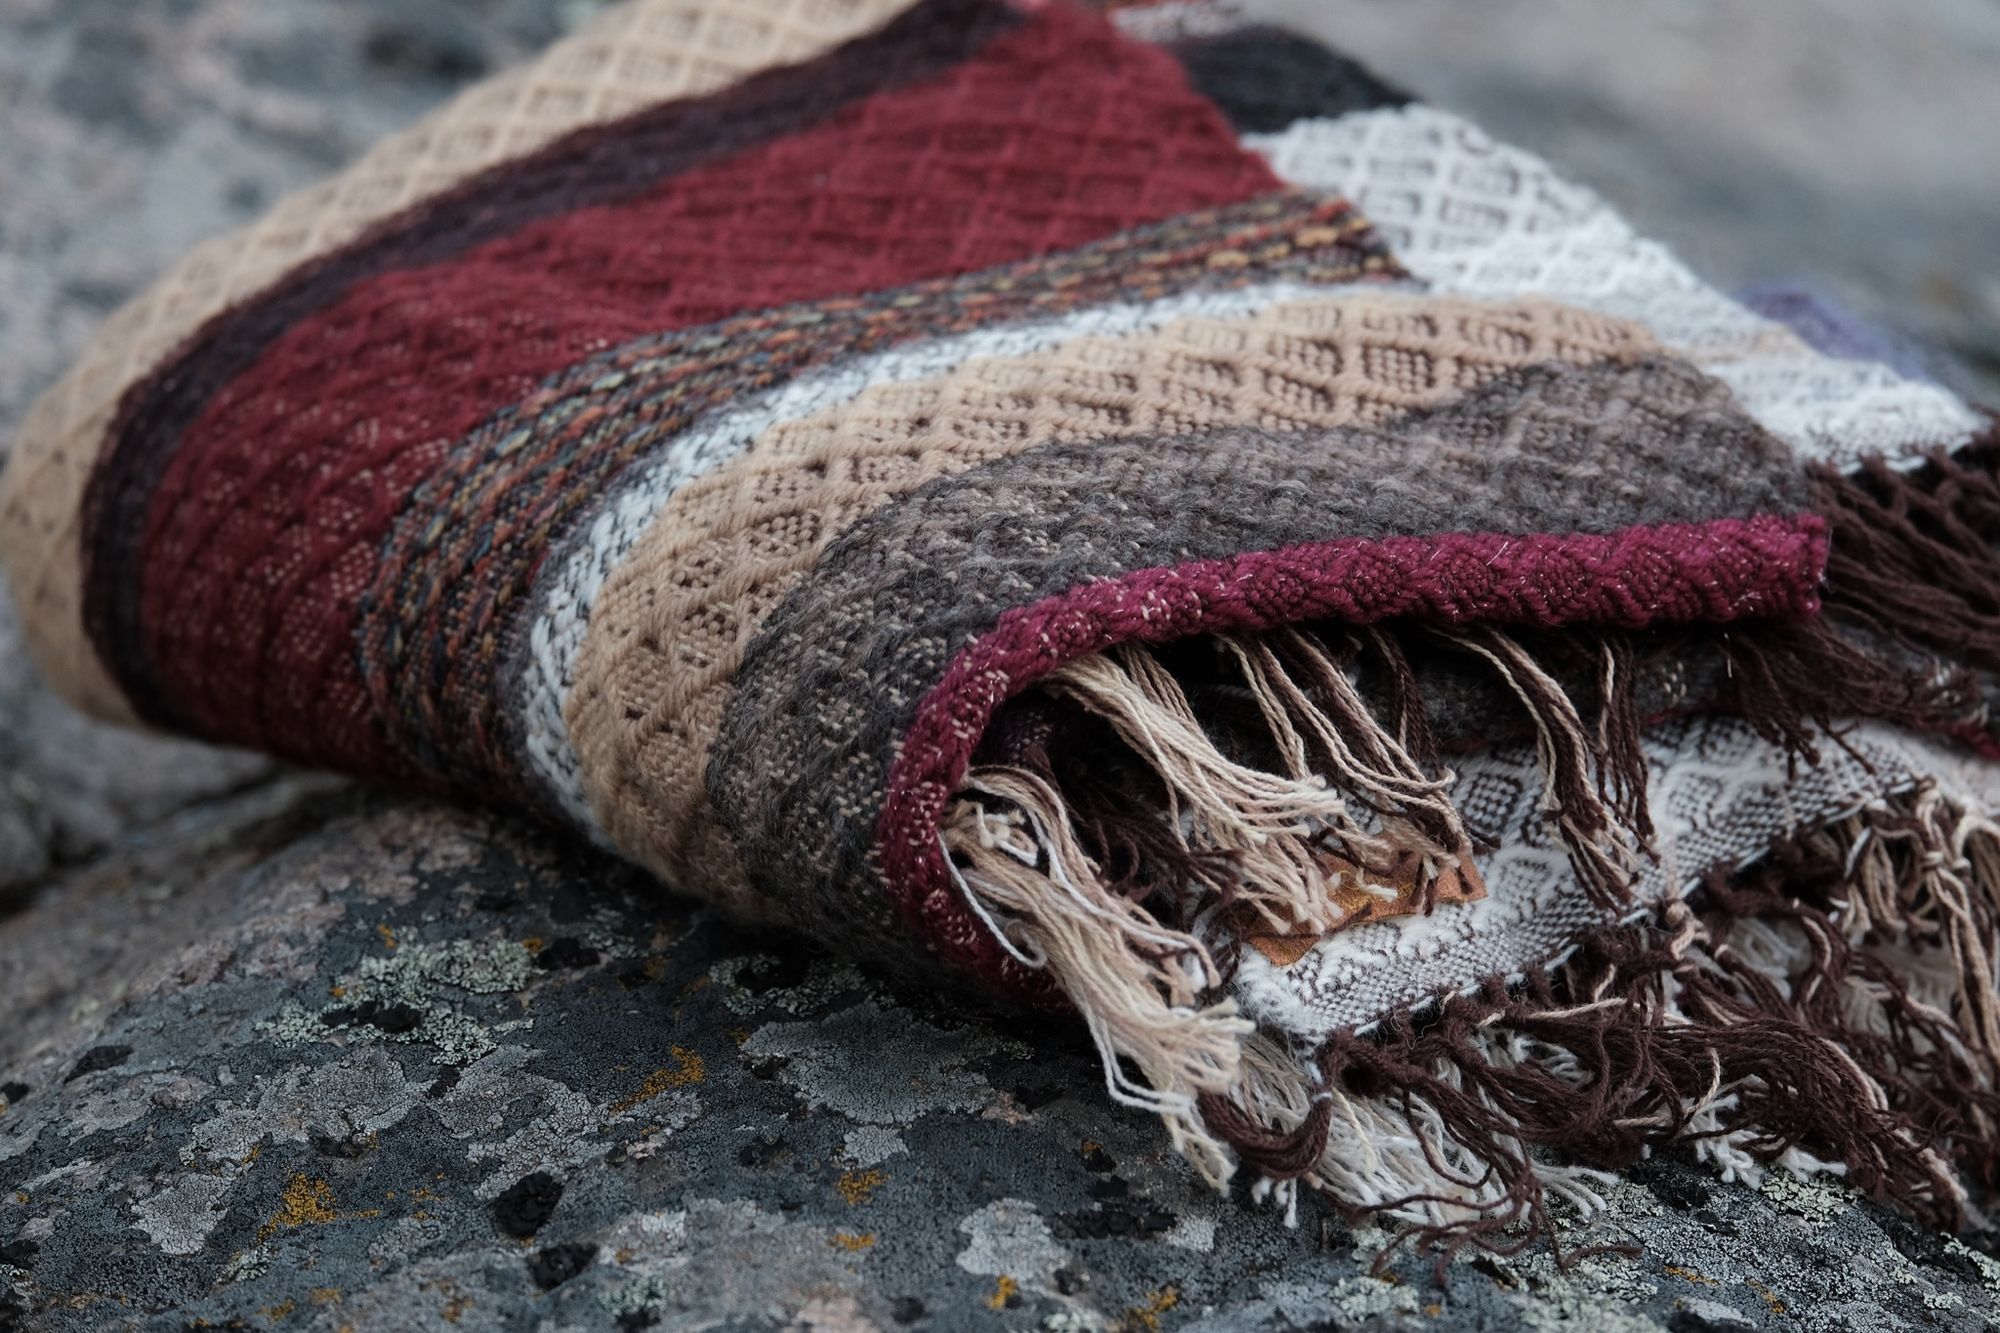 A maroon, black, purple, tan and white handwoven diamond pattern blanket lays folded on a lichen covered boulder